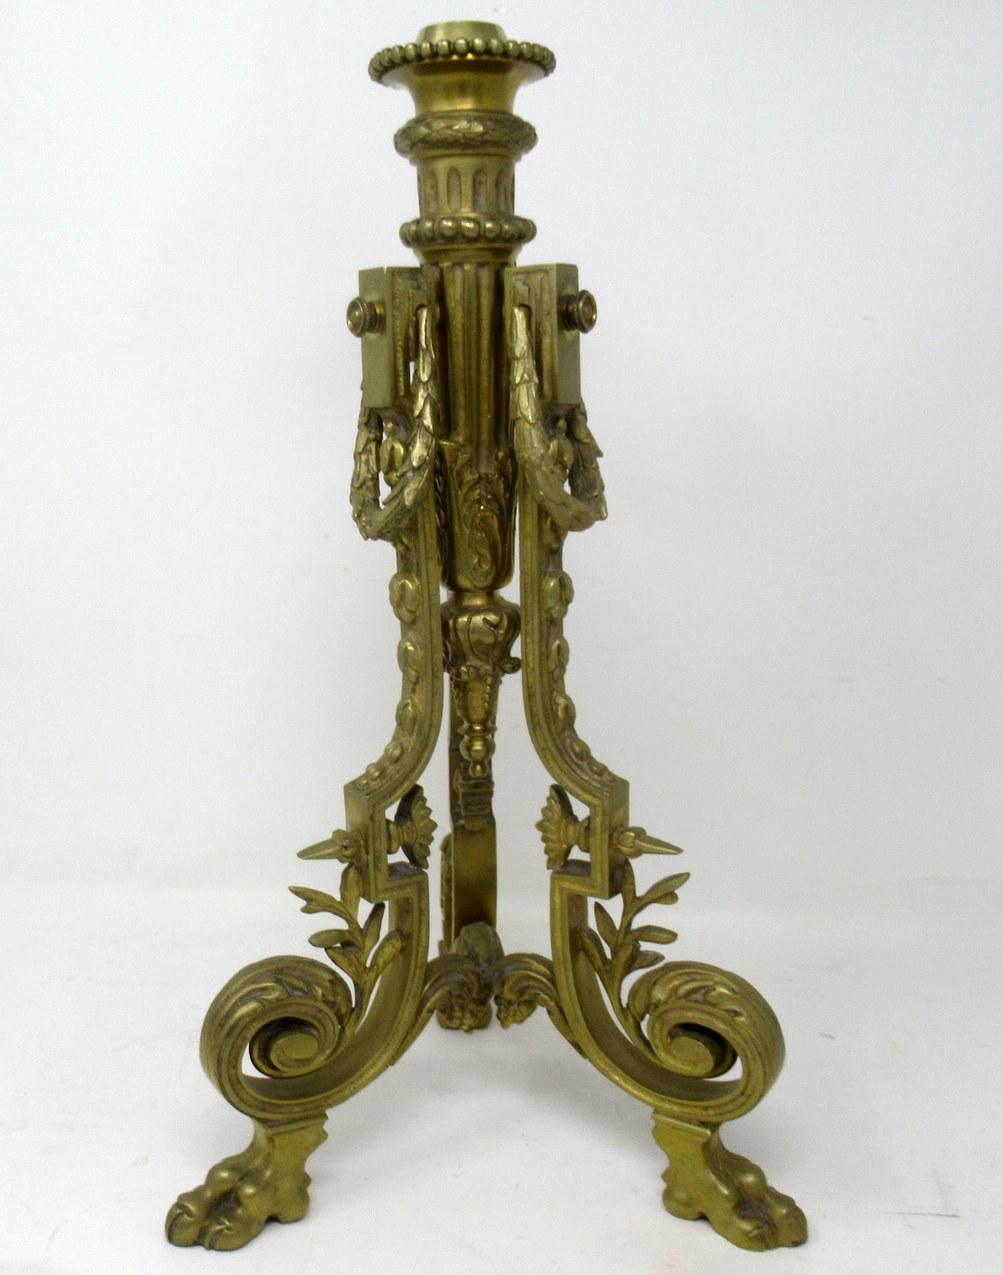 An exquisite large heavy Gauge Renaissance style ormolu fluid or oil lamp of outstanding quality and French origin, last quarter of the nineteenth century. 

The original circular glass reservoir with strawberry cut pattern below its original